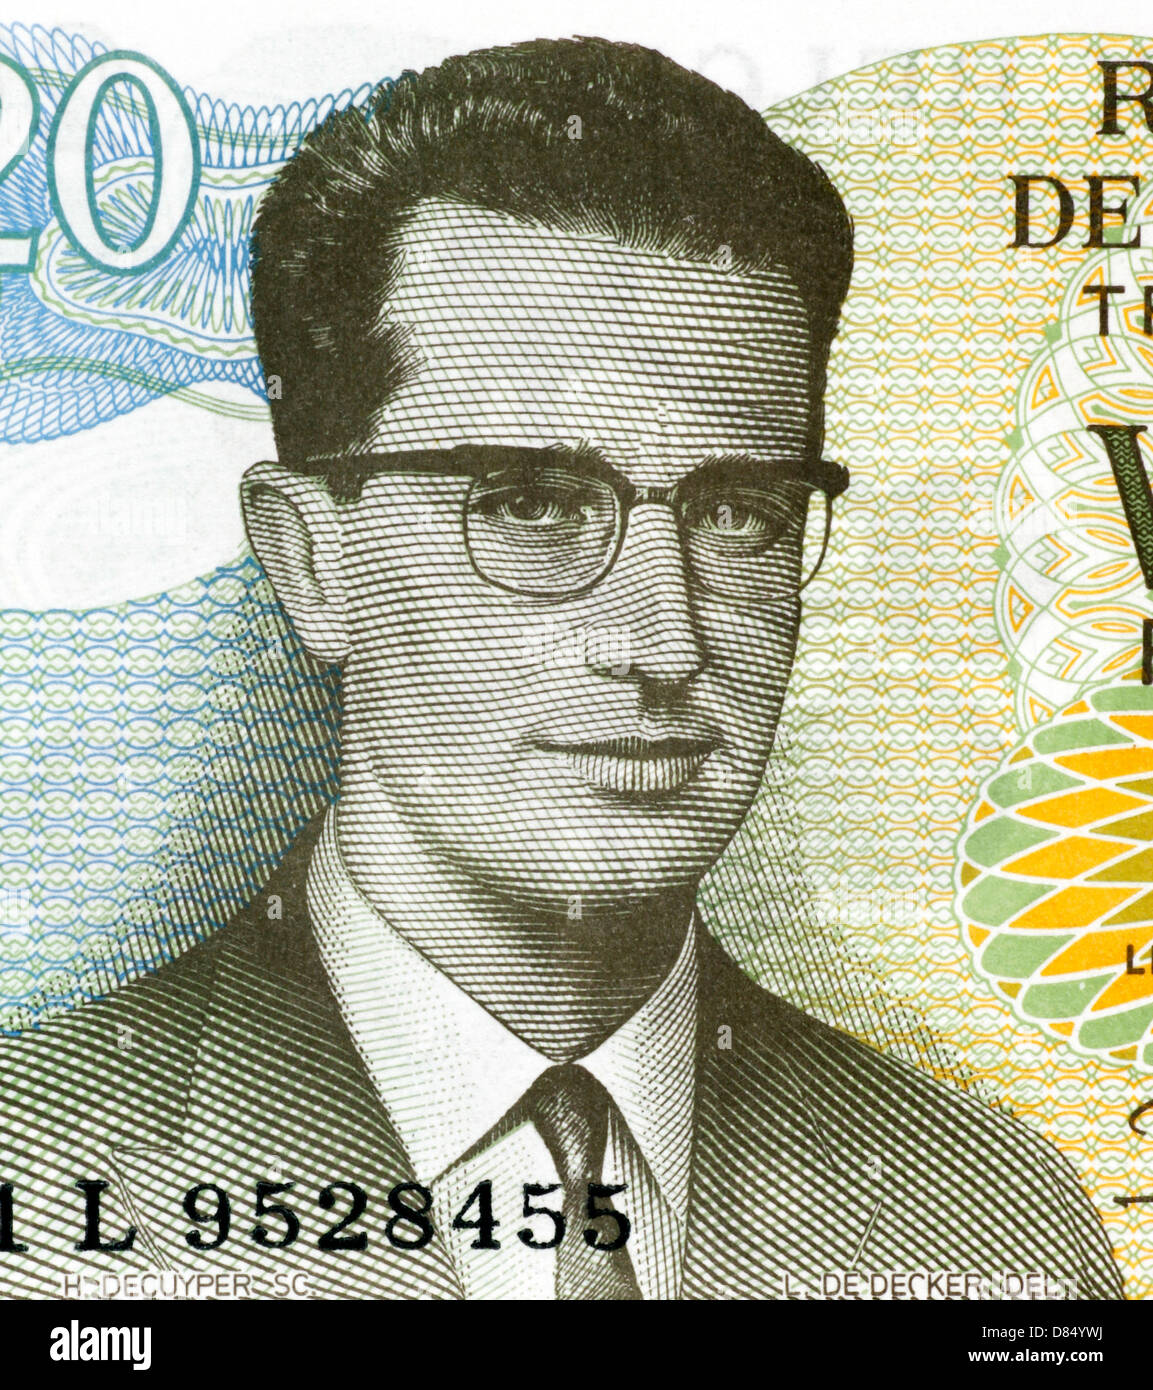 Baudouin of Belgium (1930-1993) on 20 Francs 1964 Banknote from Belgium. King of the Belgians during 1951-1993. Stock Photo